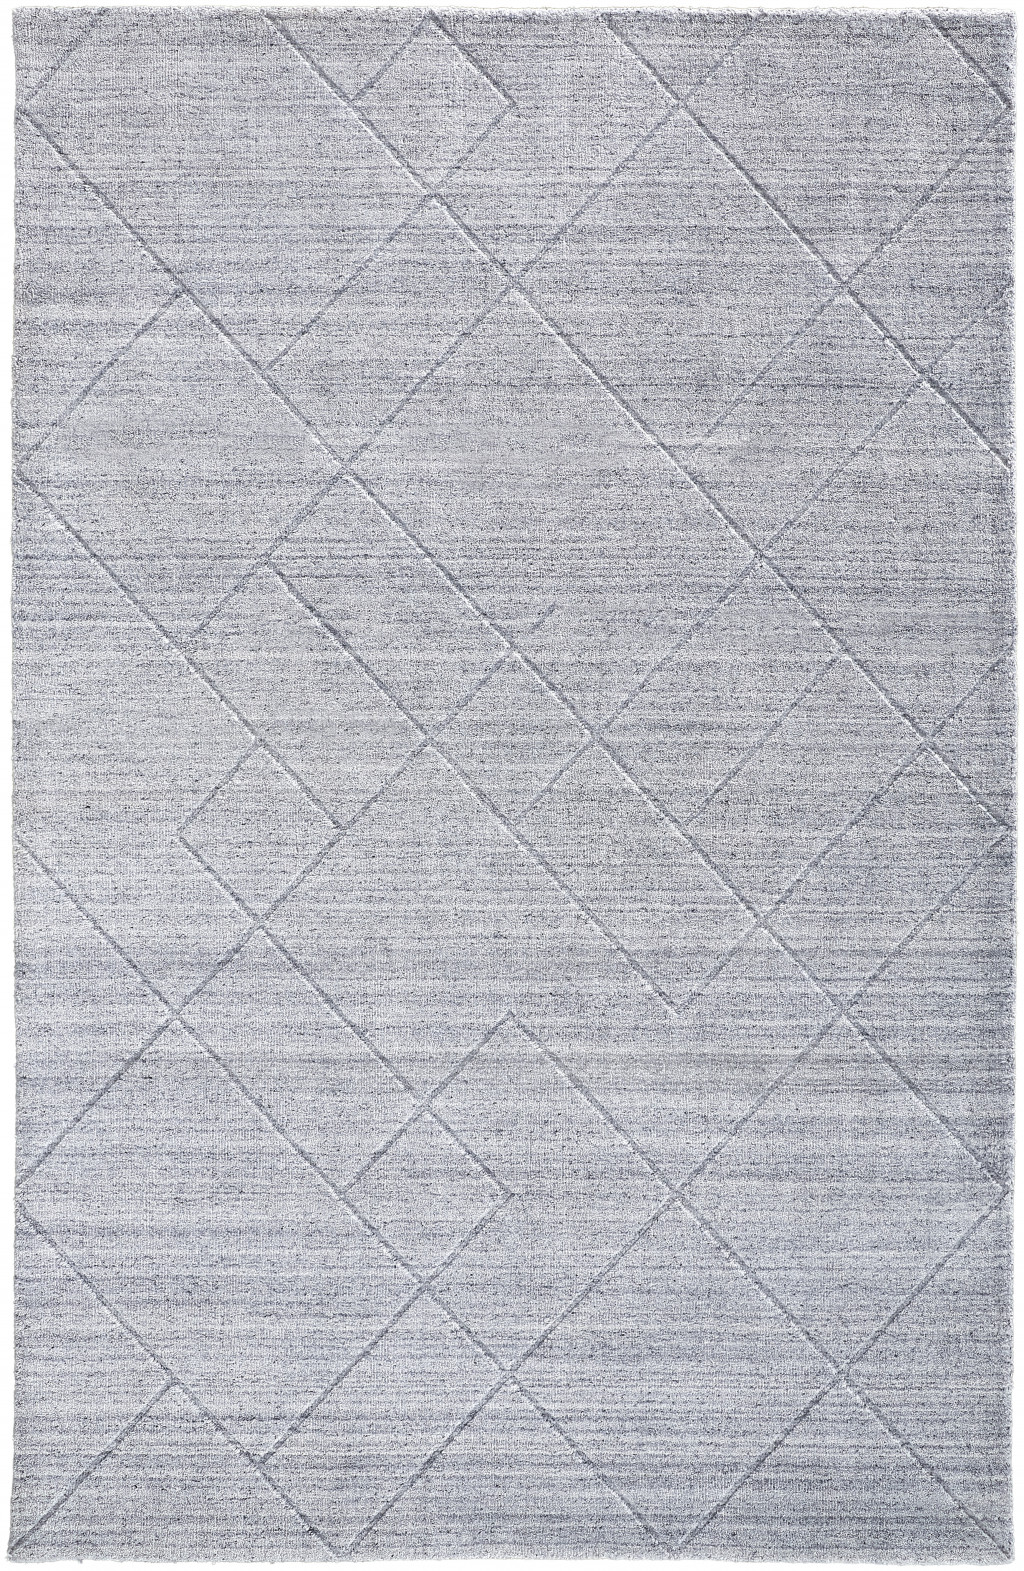 4' X 6' Gray And Silver Striped Hand Woven Area Rug-514791-1